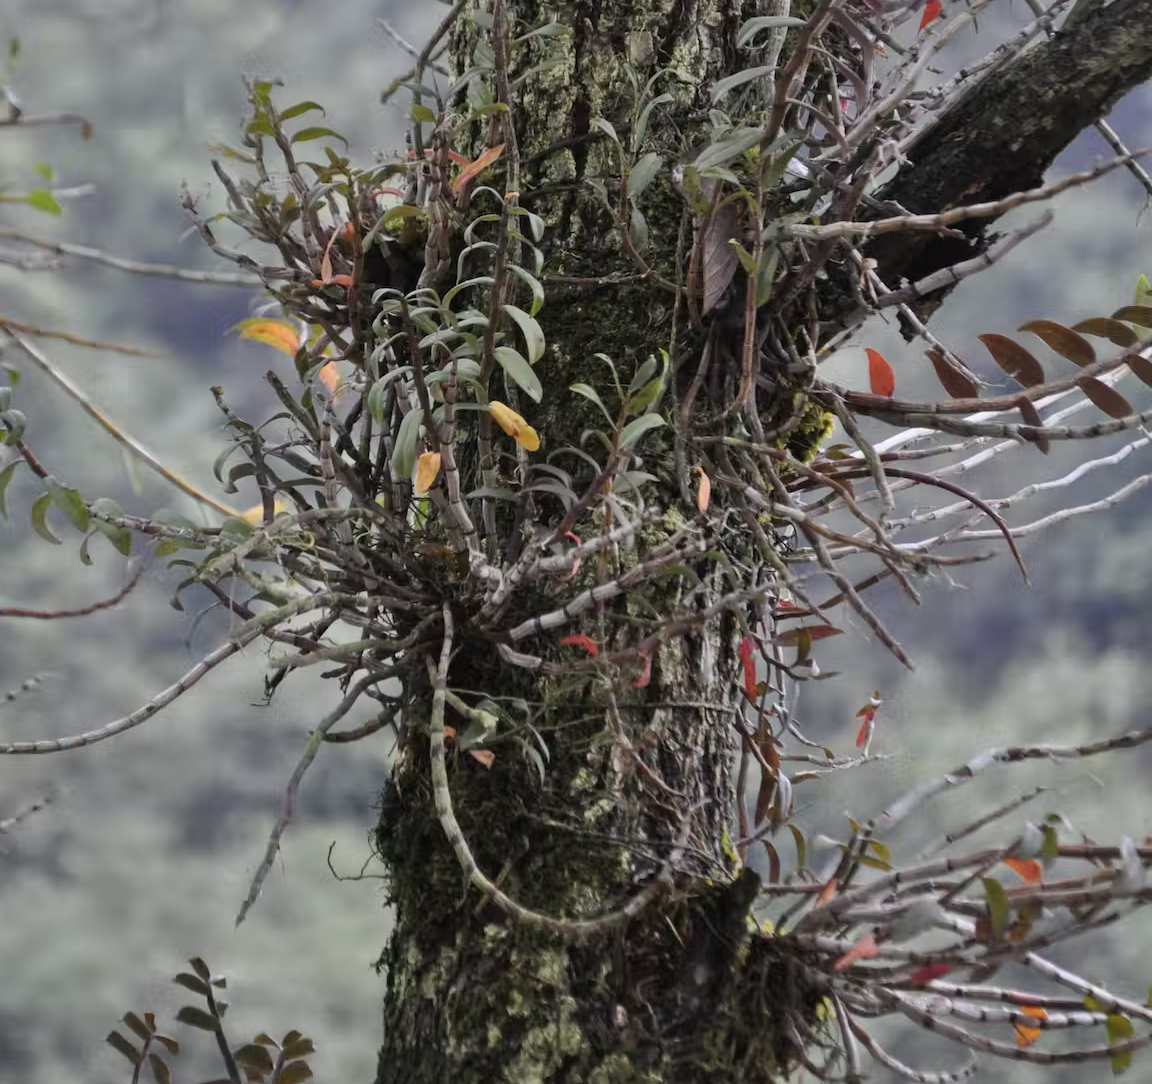 A semi-wild Dendrobium orchid growing on a tree in China’s Guangdong province. Hong Liu, CC BY-ND